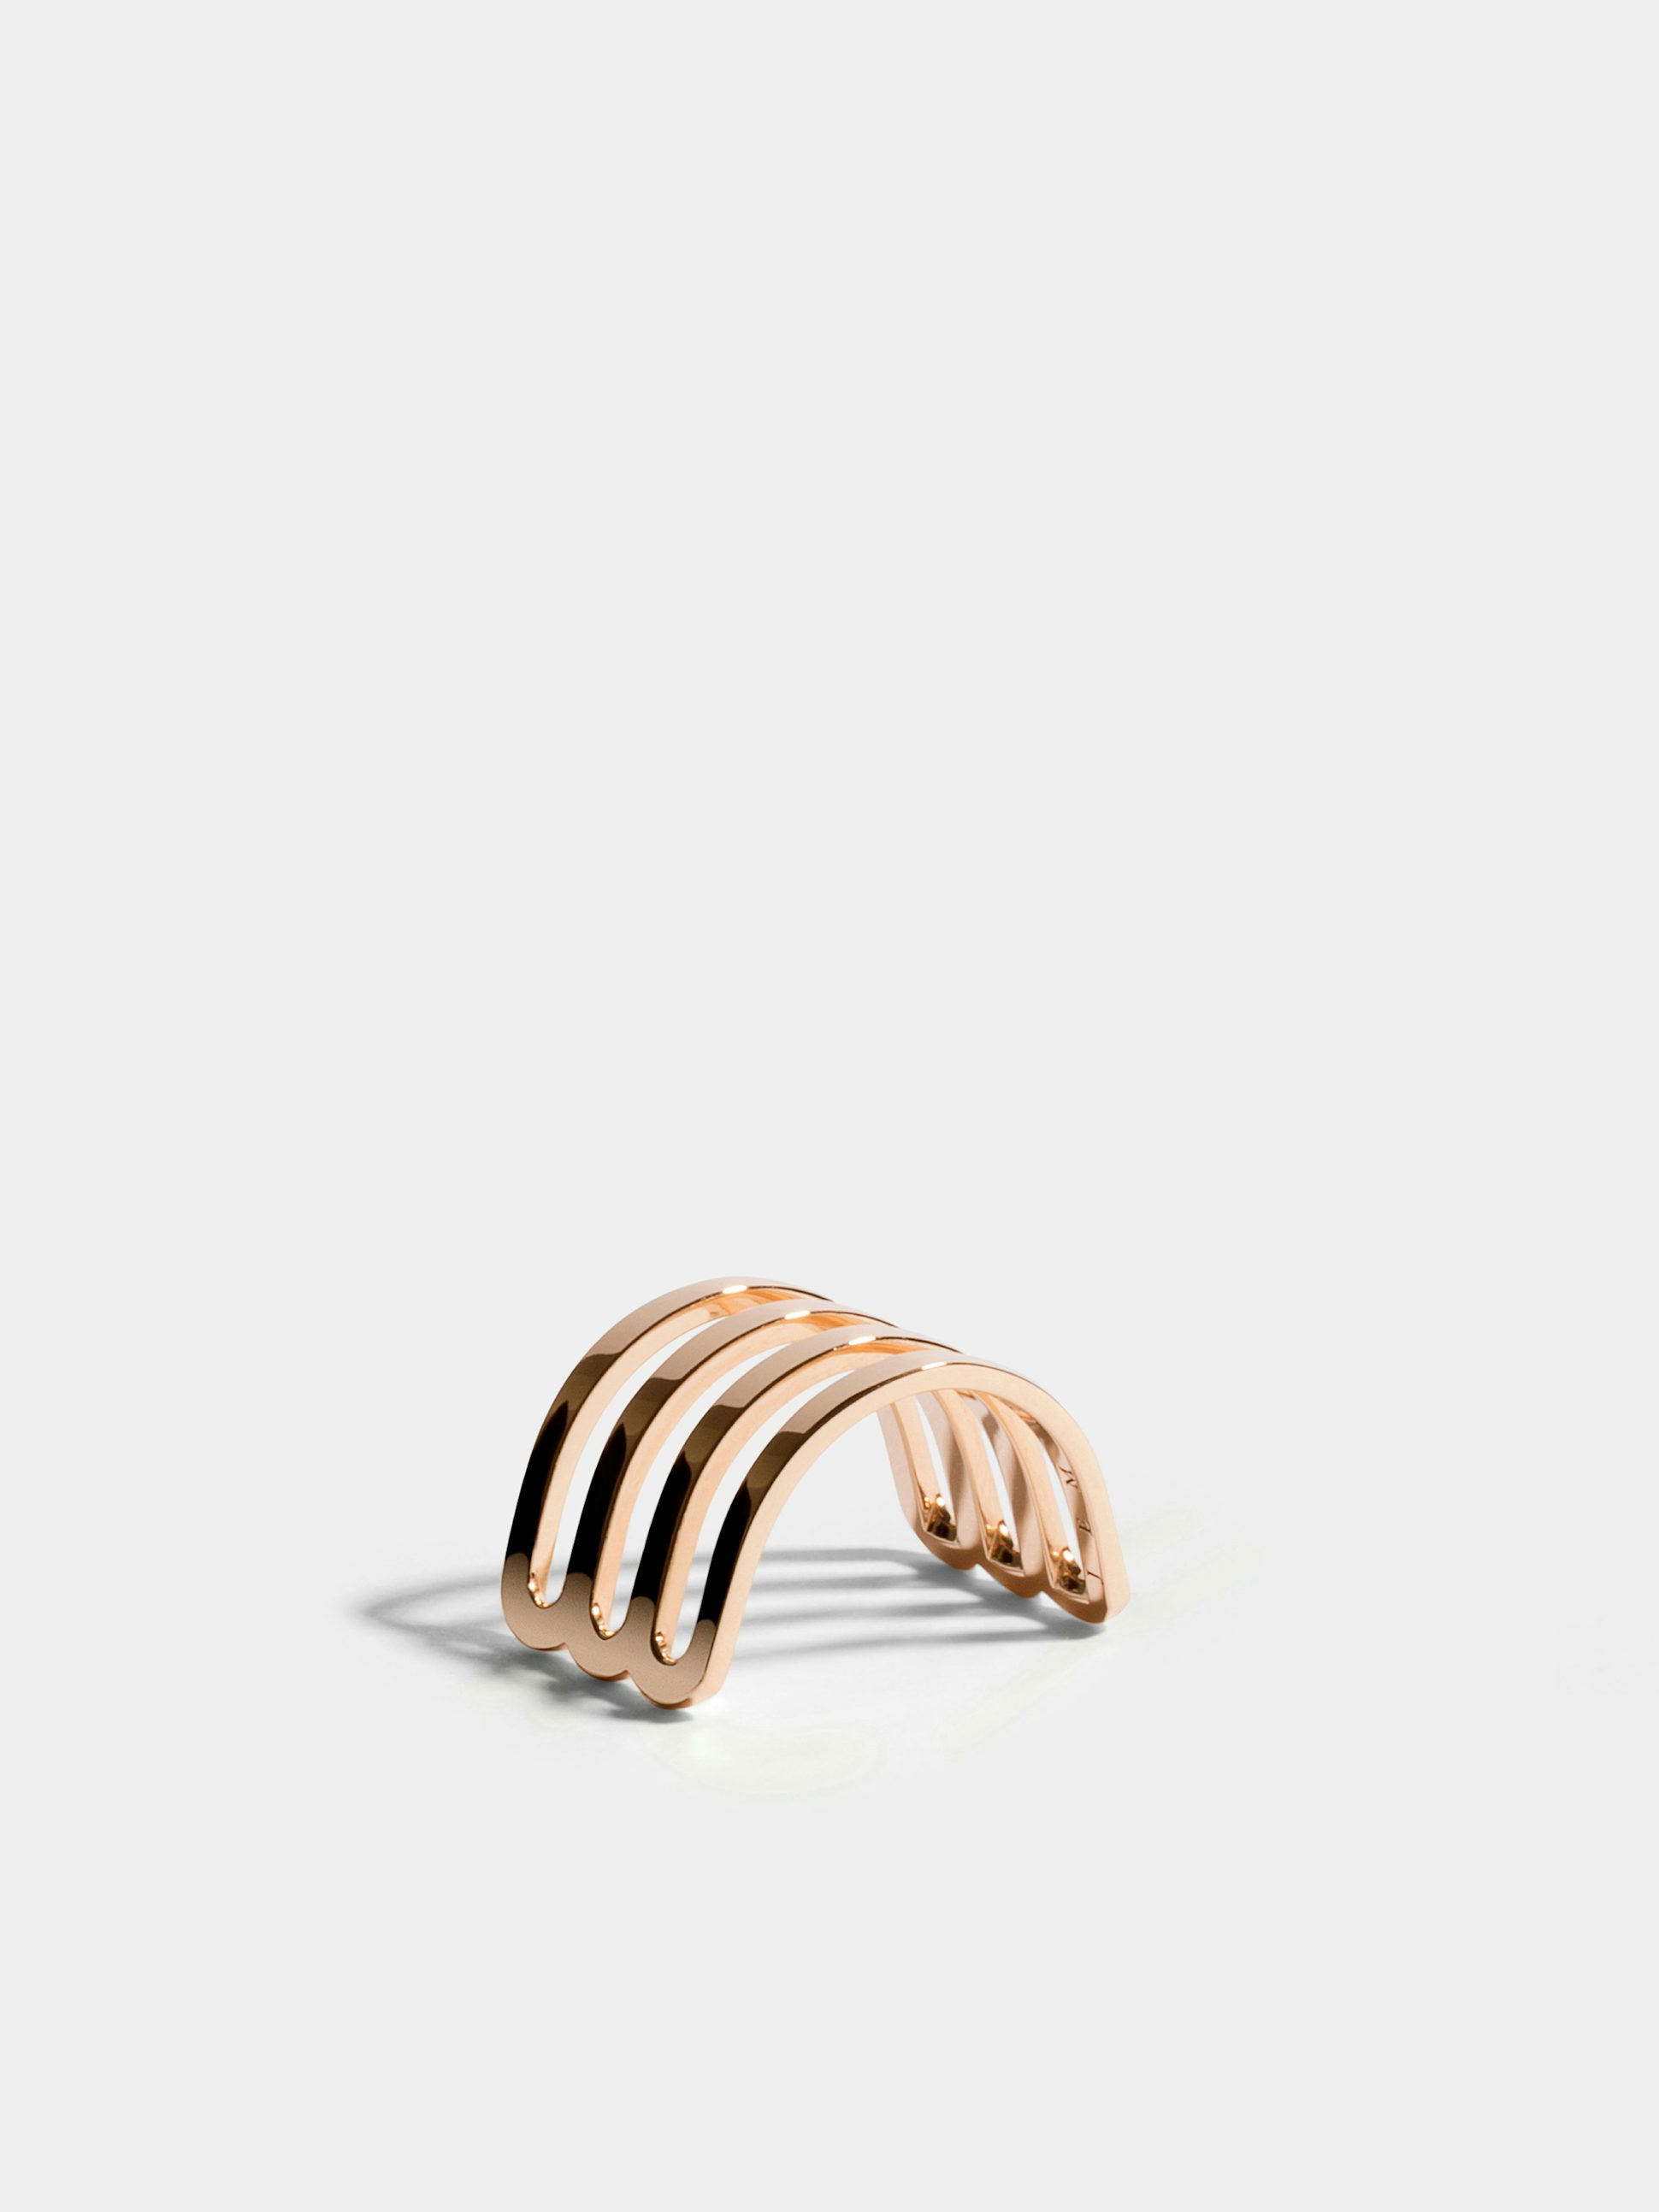 Étreintes triple half-ring in 18k Fairmined ethical rose gold with a polished finish.